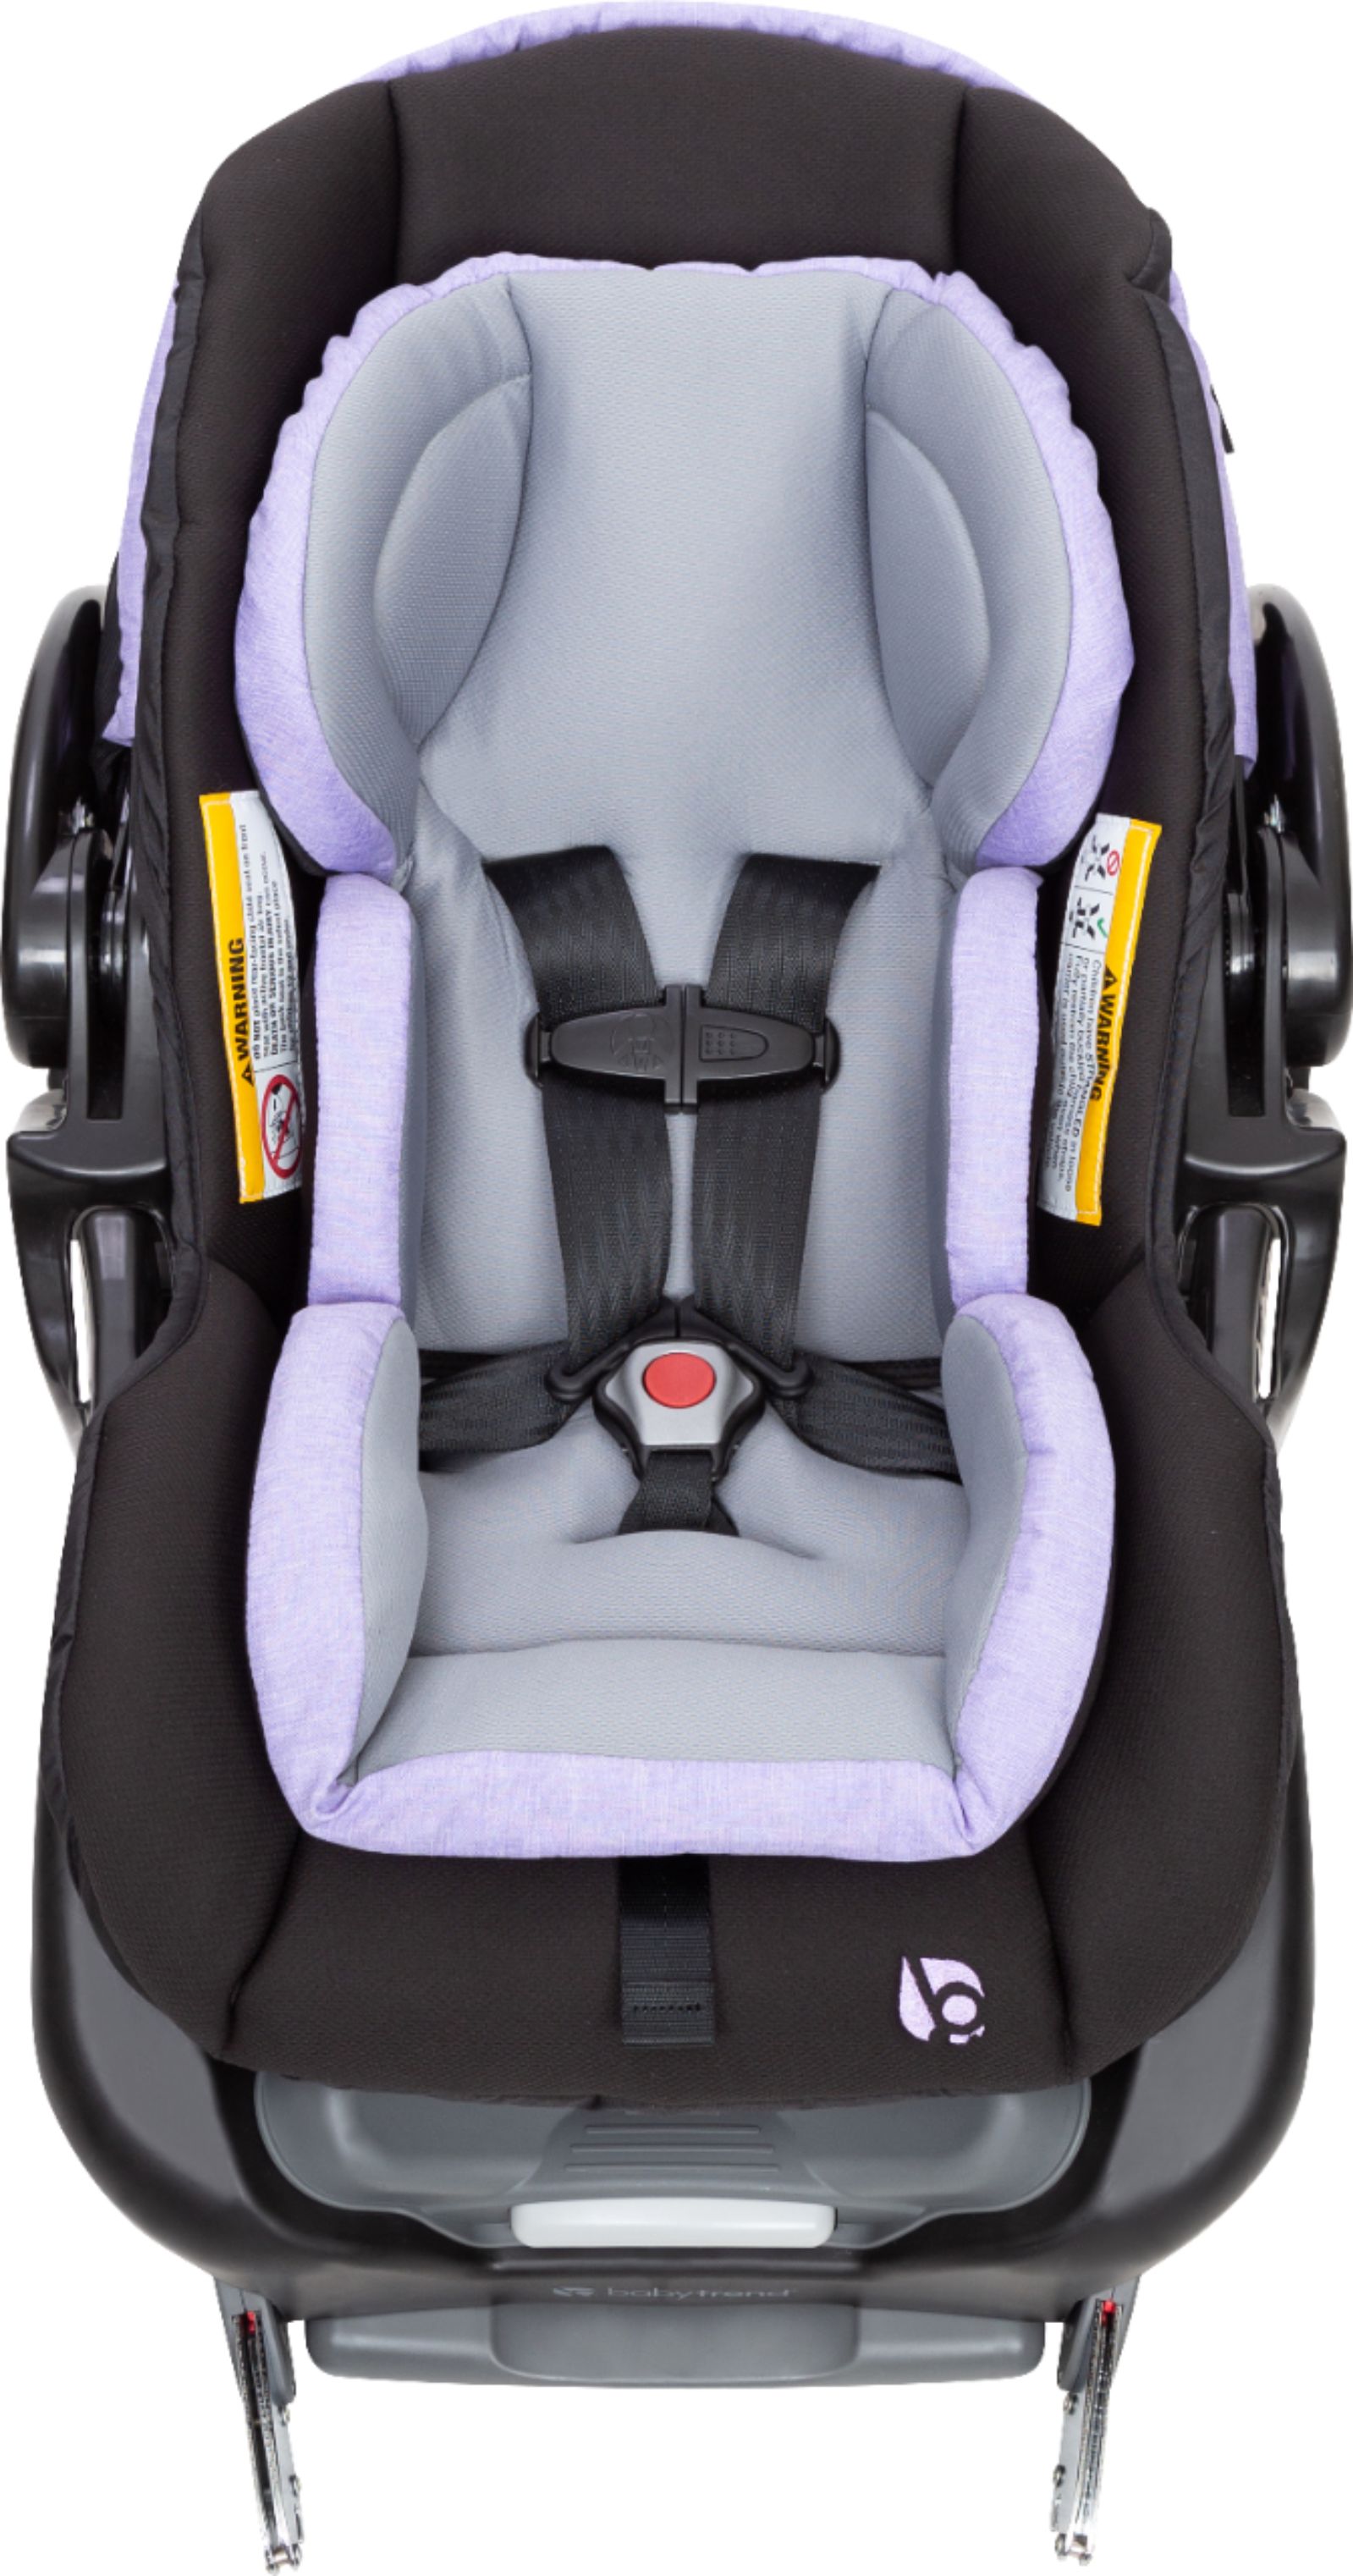 Baby Trend Car Seat Safety Carnawall Com - Is Baby Trend A Safe Car Seat